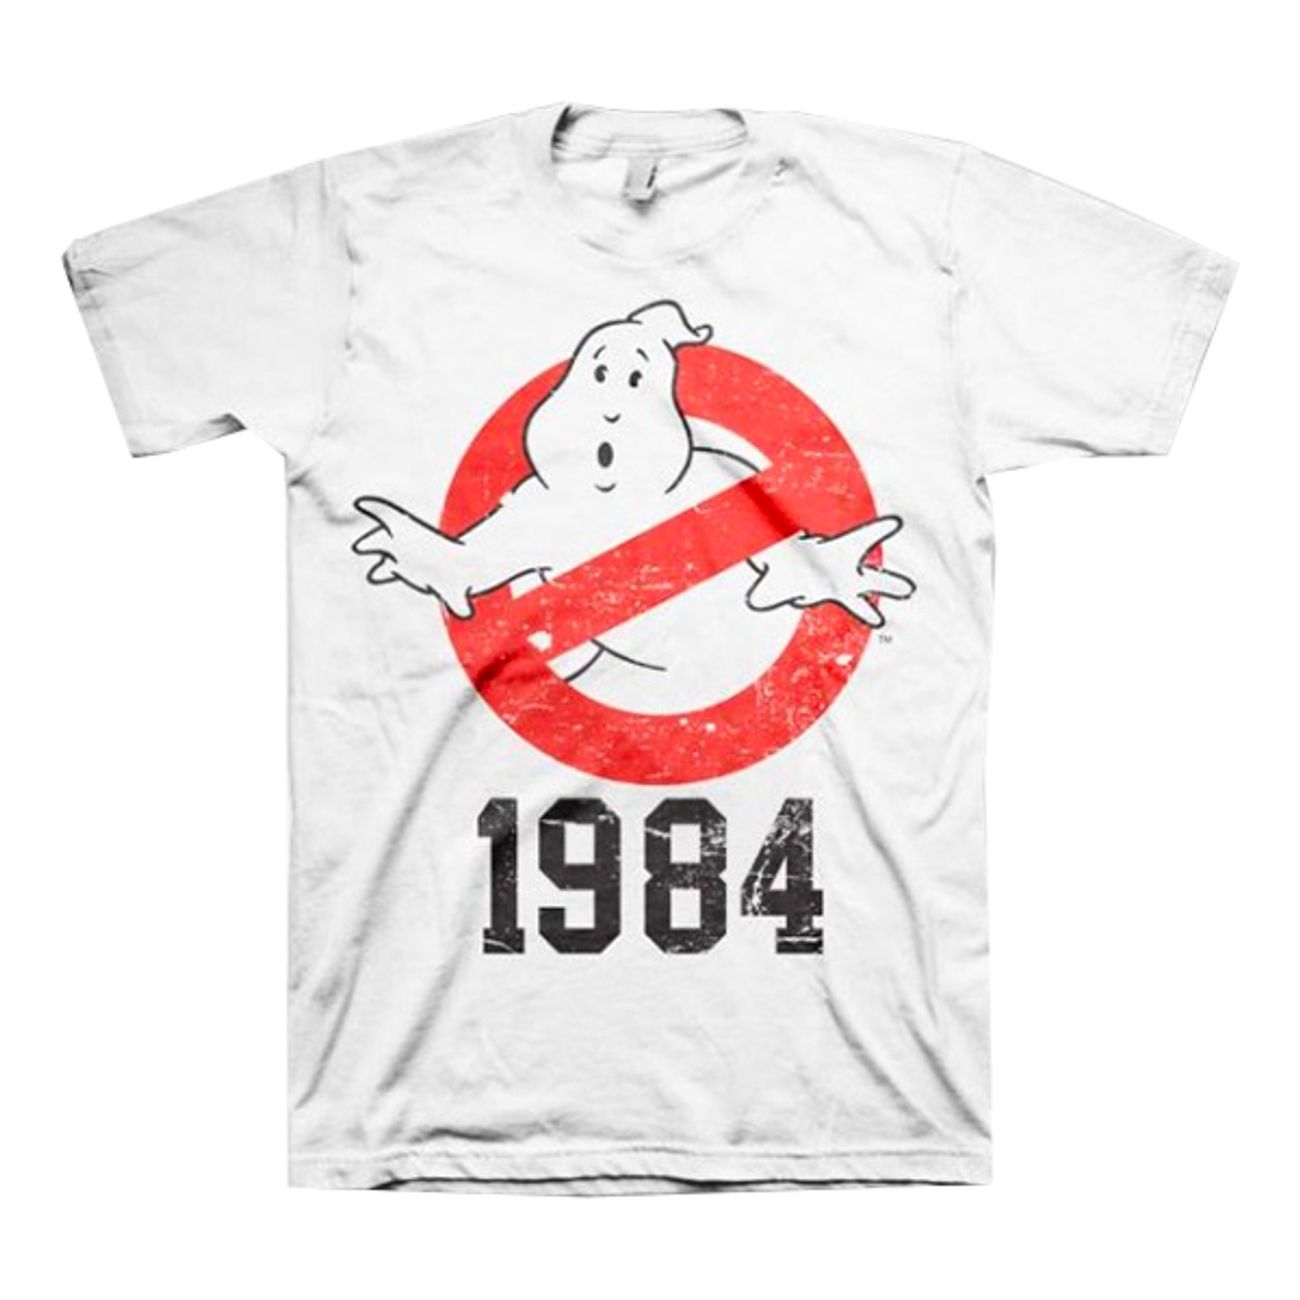 ghostbusters-1984-t-shirt-74784-1